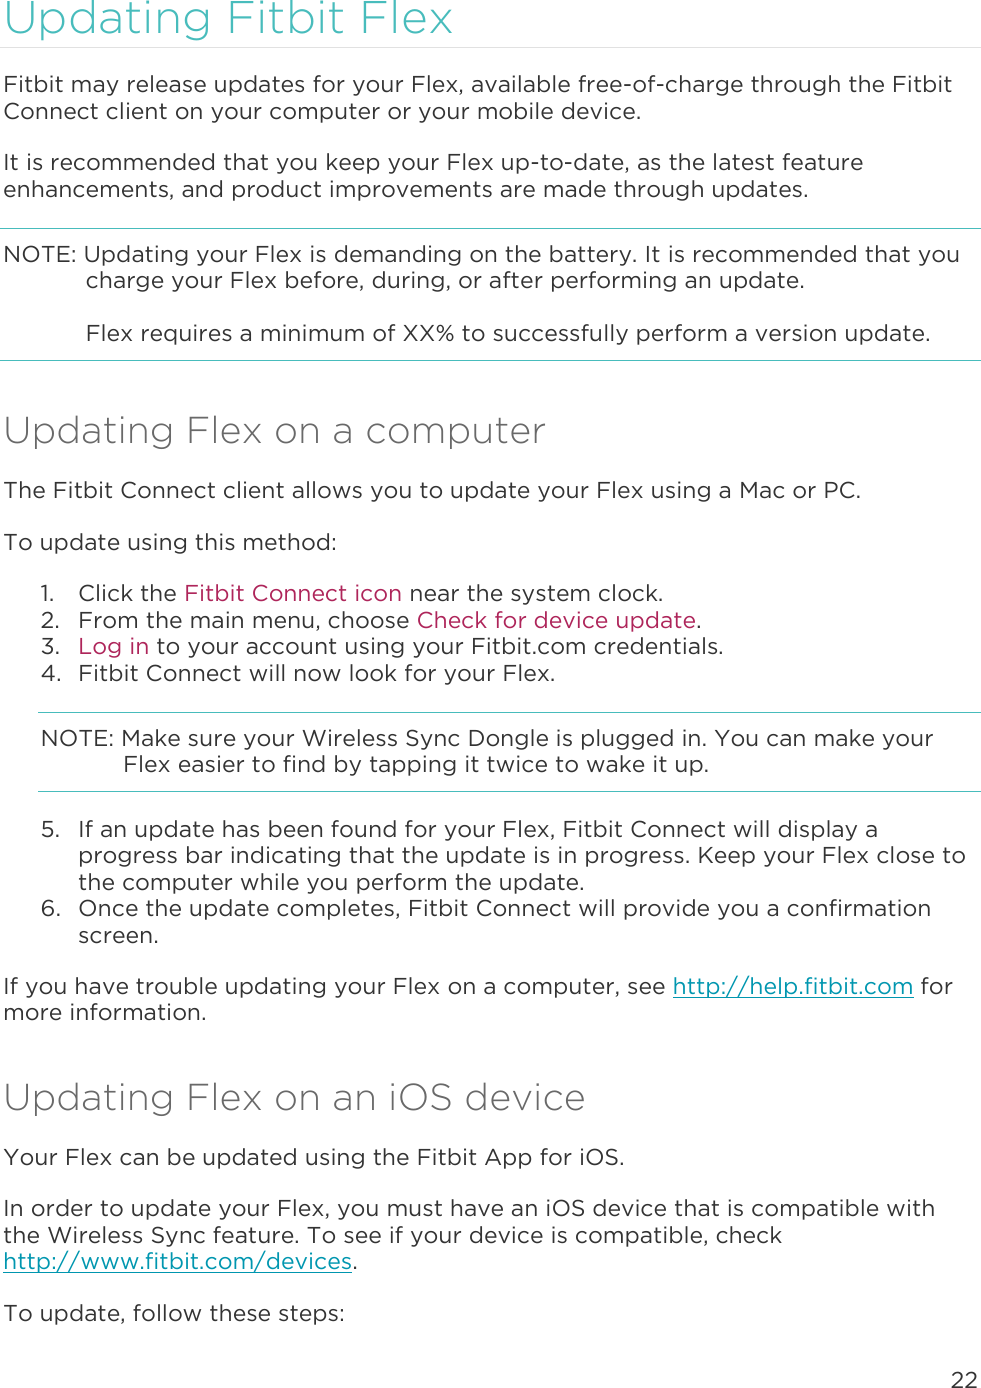 22  Updating Fitbit Flex Fitbit may release updates for your Flex, available free-of-charge through the Fitbit Connect client on your computer or your mobile device.  It is recommended that you keep your Flex up-to-date, as the latest feature enhancements, and product improvements are made through updates.  NOTE: Updating your Flex is demanding on the battery. It is recommended that you charge your Flex before, during, or after performing an update.   Flex requires a minimum of XX% to successfully perform a version update.  Updating Flex on a computer The Fitbit Connect client allows you to update your Flex using a Mac or PC.  To update using this method:  1. Click the Fitbit Connect icon near the system clock.  2. From the main menu, choose Check for device update. 3. Log in to your account using your Fitbit.com credentials.  4. Fitbit Connect will now look for your Flex. NOTE: Make sure your Wireless Sync Dongle is plugged in. You can make your Flex easier to find by tapping it twice to wake it up.  5. If an update has been found for your Flex, Fitbit Connect will display a progress bar indicating that the update is in progress. Keep your Flex close to the computer while you perform the update.   6. Once the update completes, Fitbit Connect will provide you a confirmation screen.  If you have trouble updating your Flex on a computer, see http://help.fitbit.com for more information. Updating Flex on an iOS device Your Flex can be updated using the Fitbit App for iOS.  In order to update your Flex, you must have an iOS device that is compatible with the Wireless Sync feature. To see if your device is compatible, check http://www.fitbit.com/devices.  To update, follow these steps:  